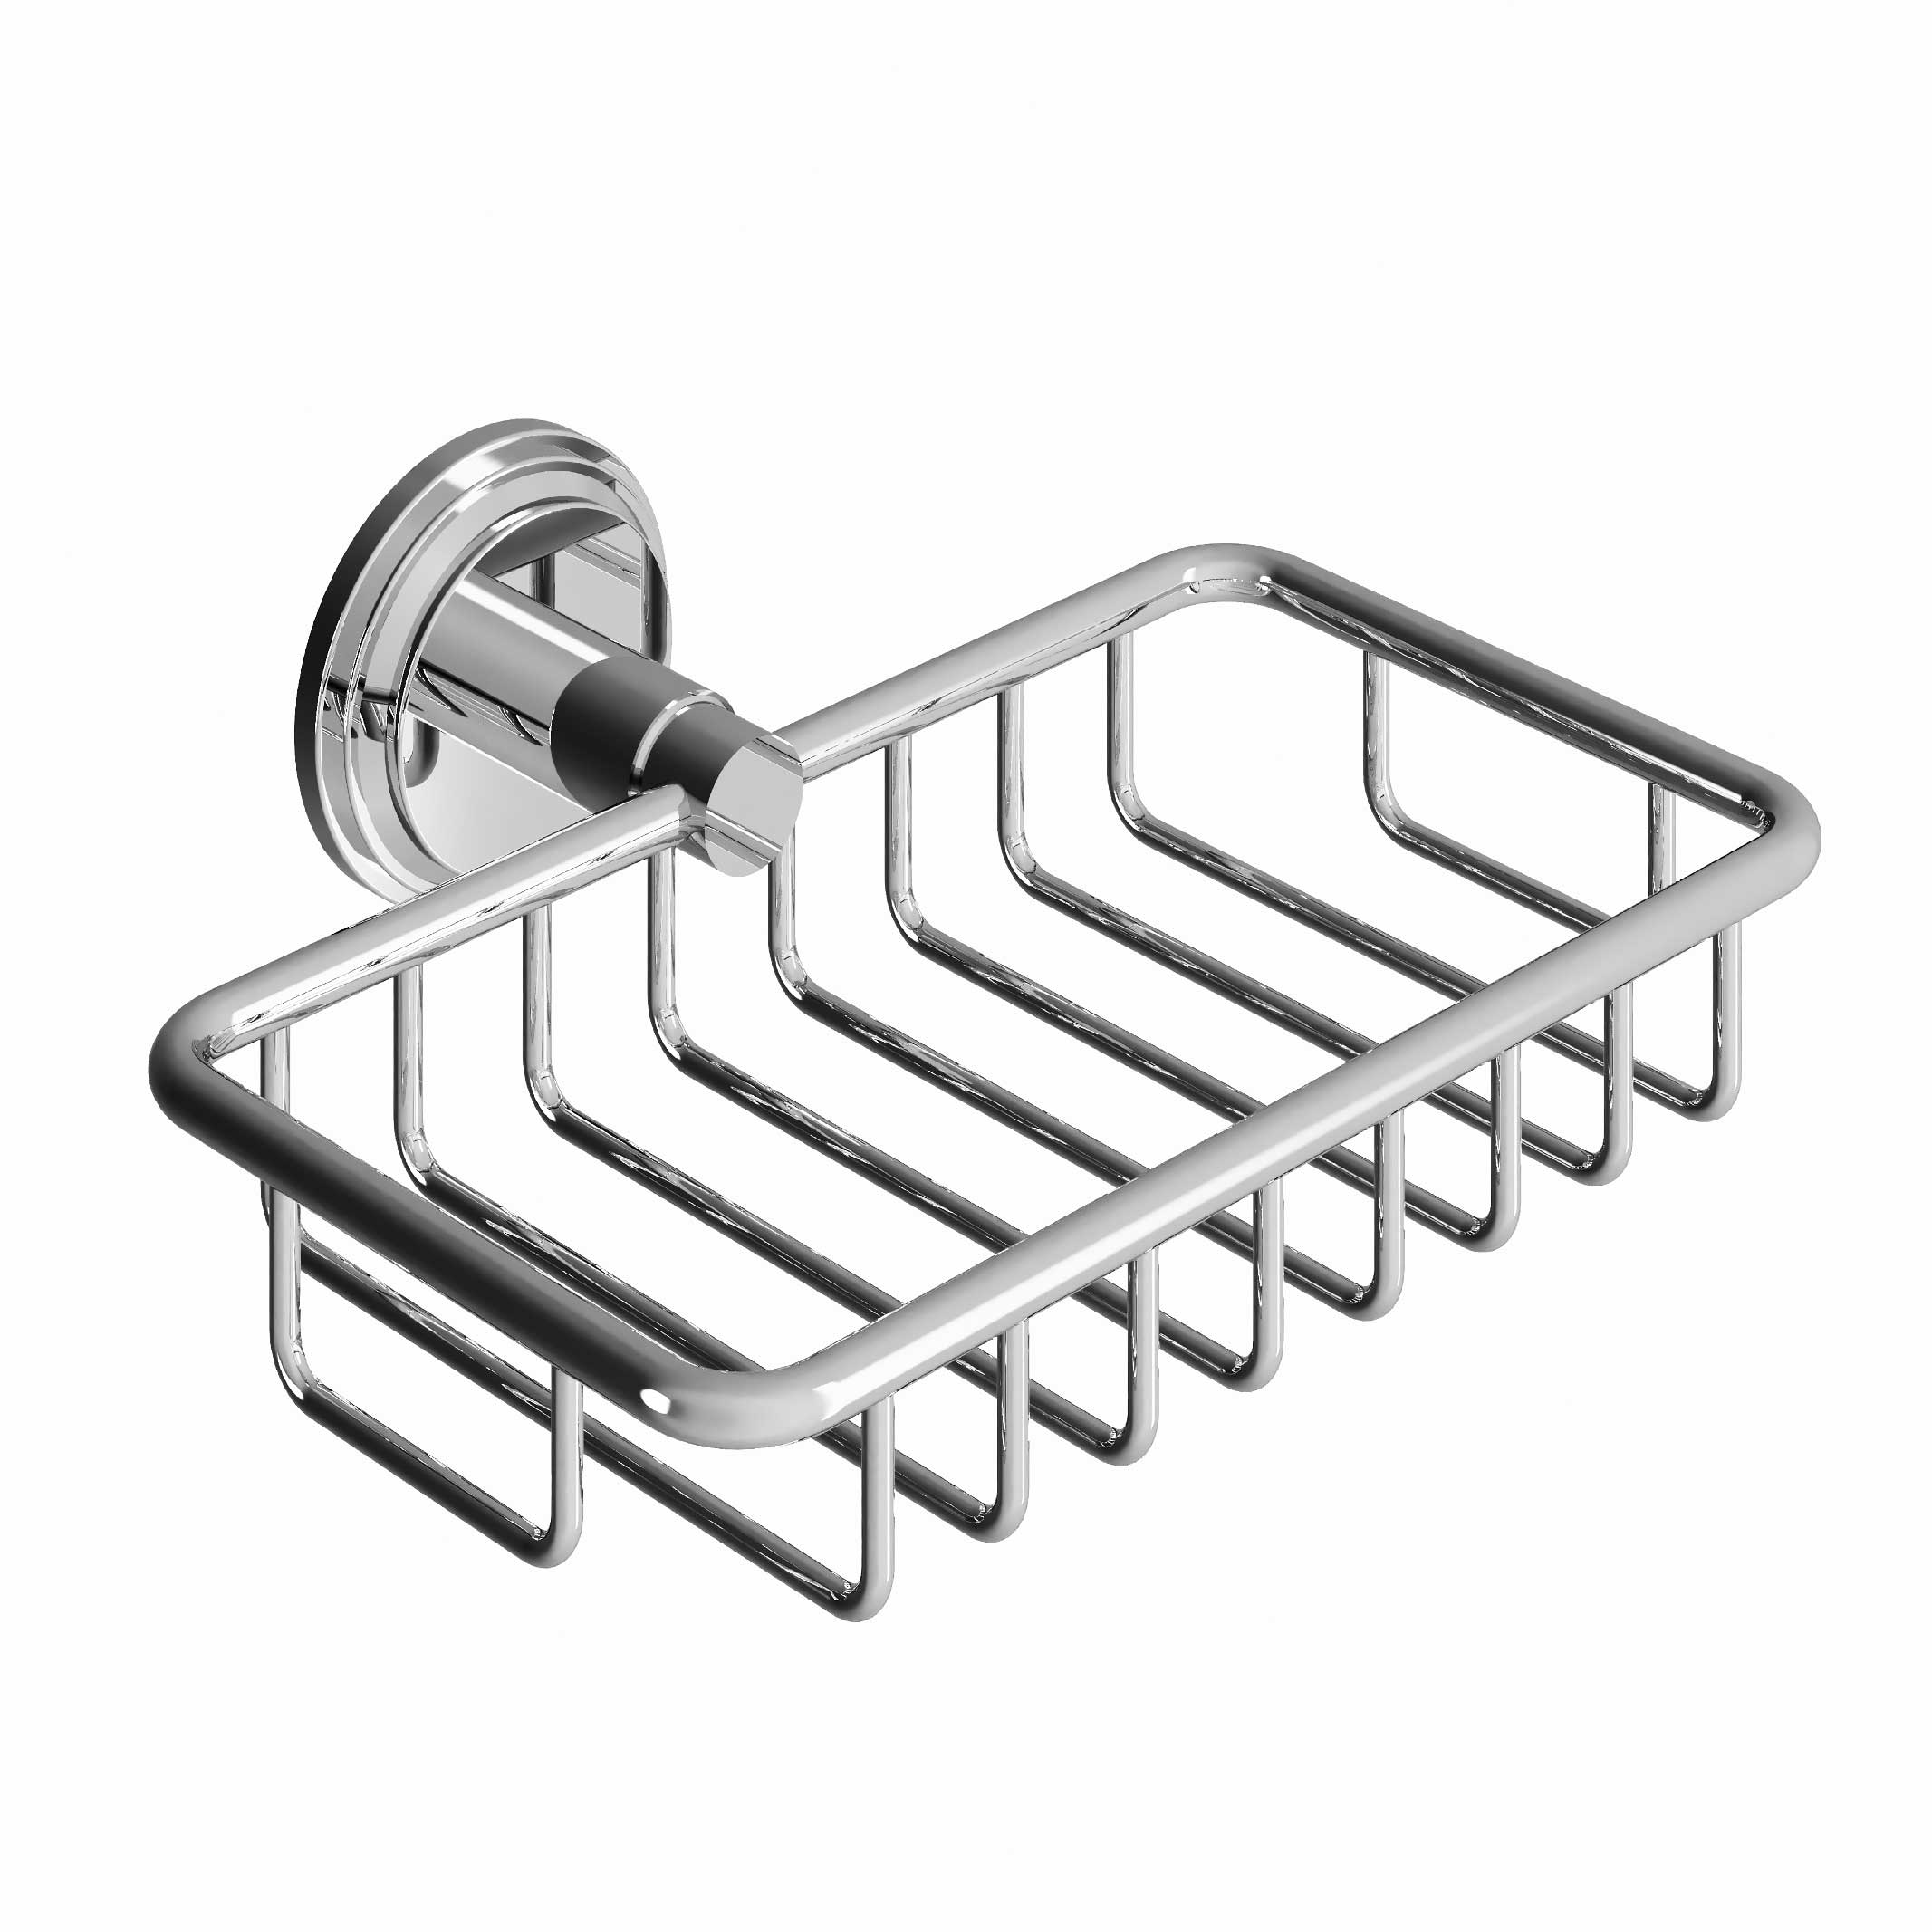 M60-519 Wall mounted shower soap holder